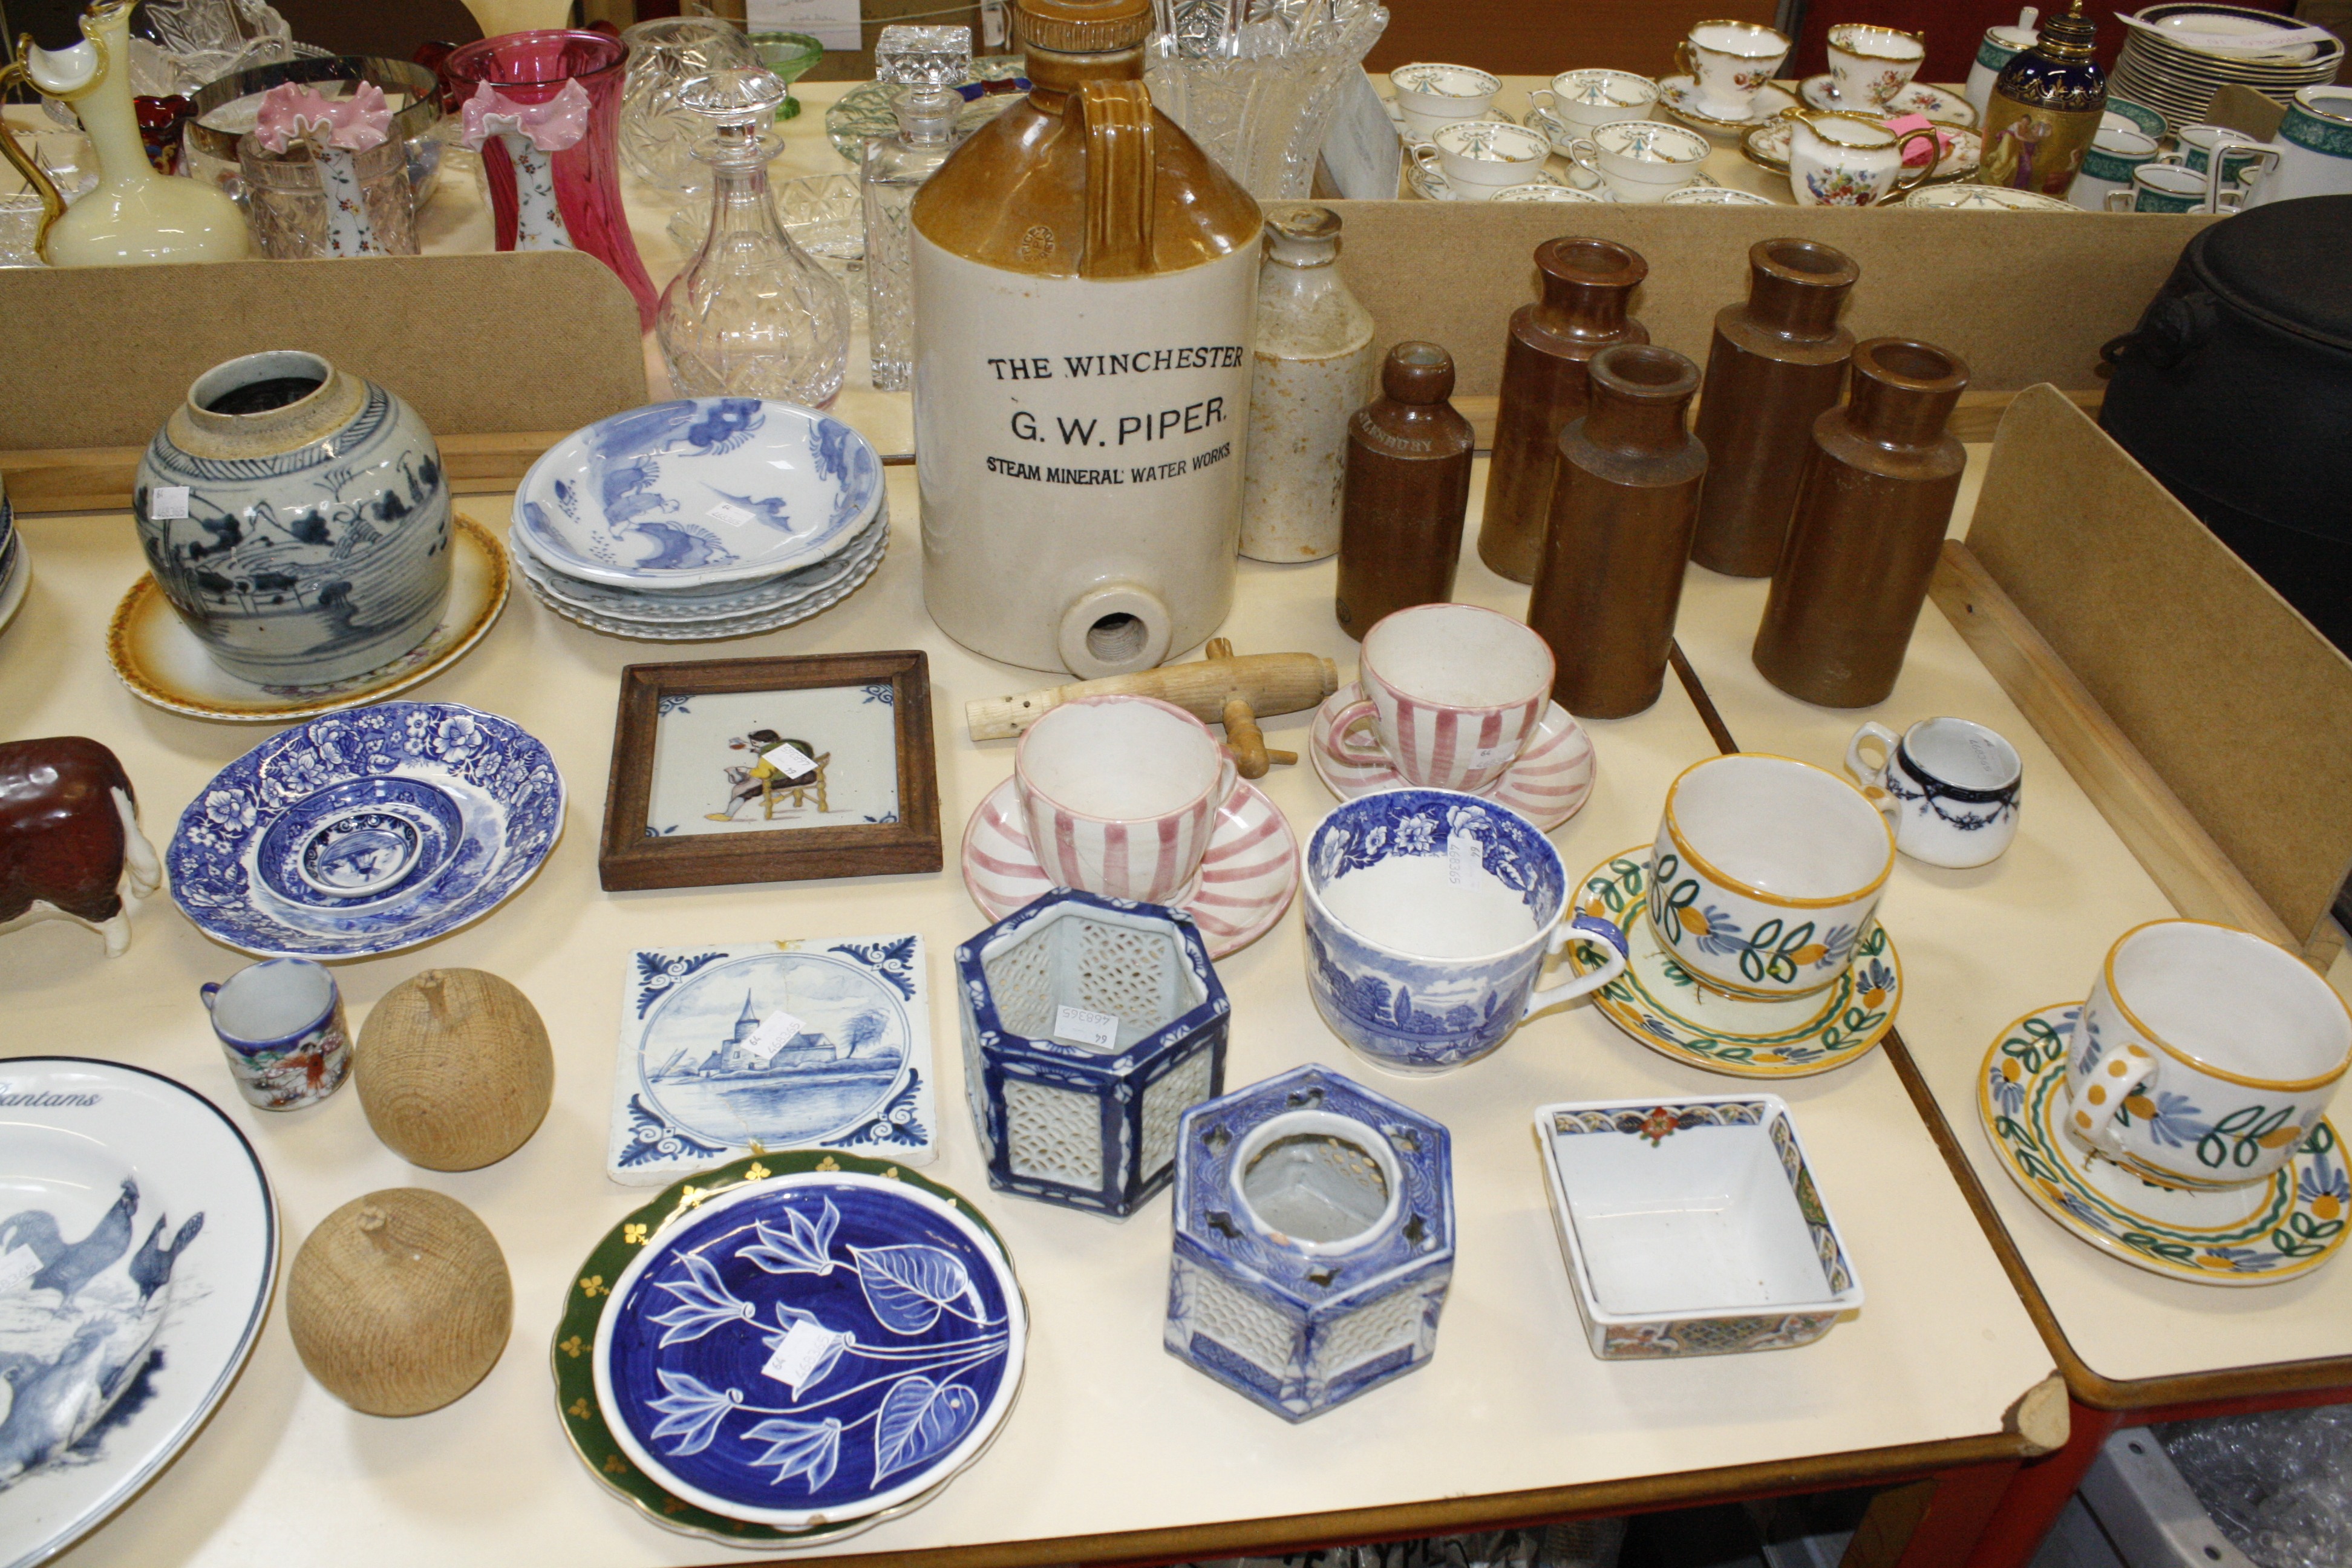 A quantity of blue and white ceramics, stoneware, Royal Worcester figure and other decorative ware - Image 2 of 2